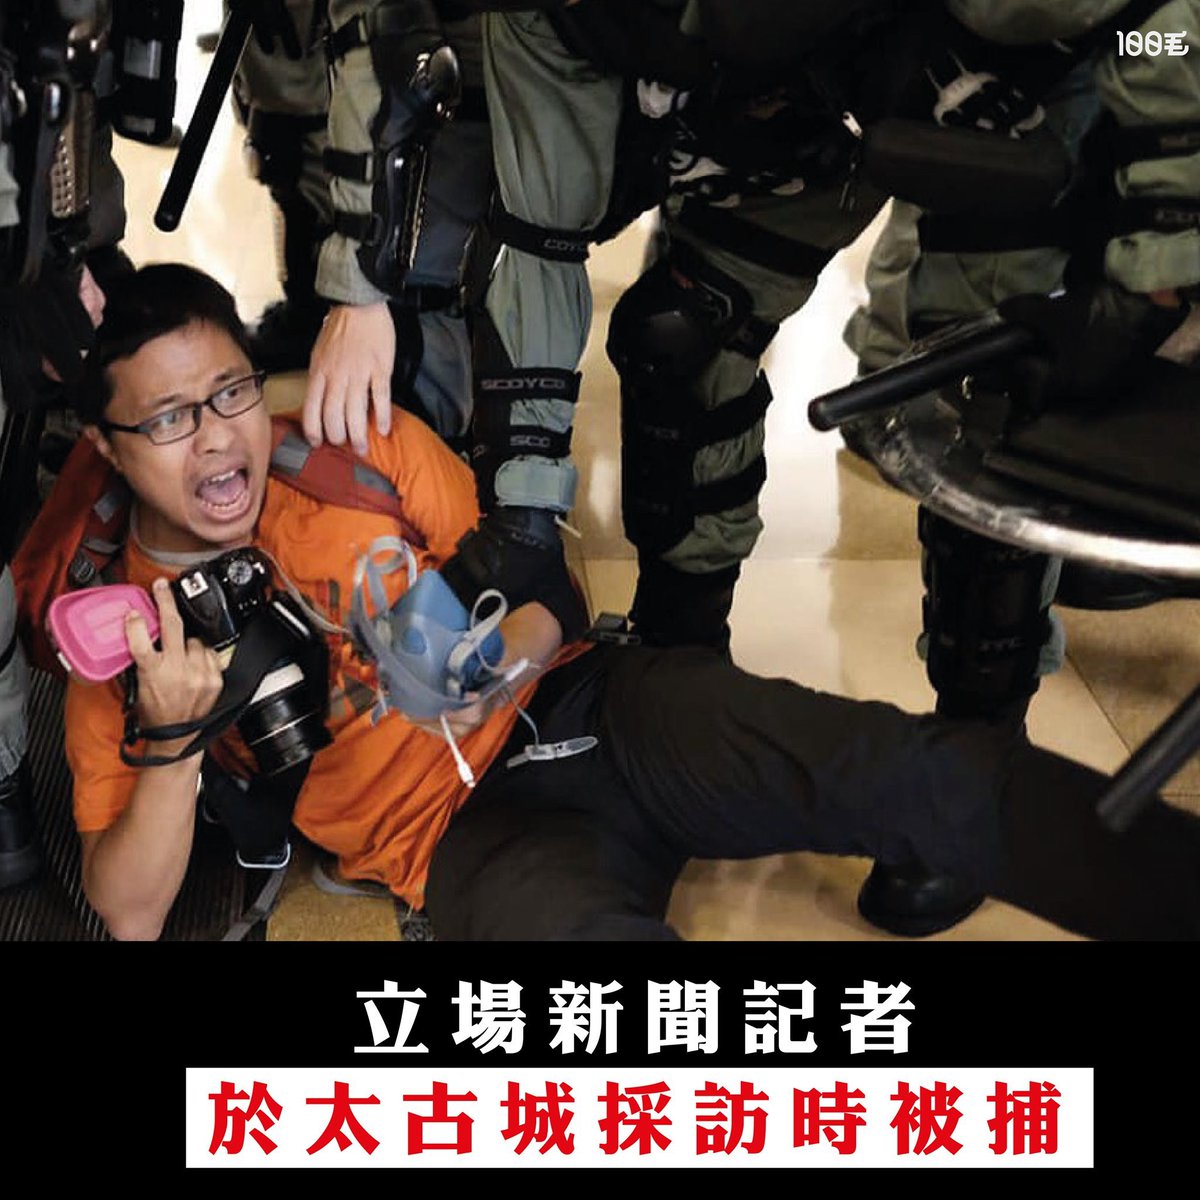 even press is being arrested... 
#HKPoliceState #StandwithHonKong #FightForFreedom #thanksthepress #shameonhkpolice